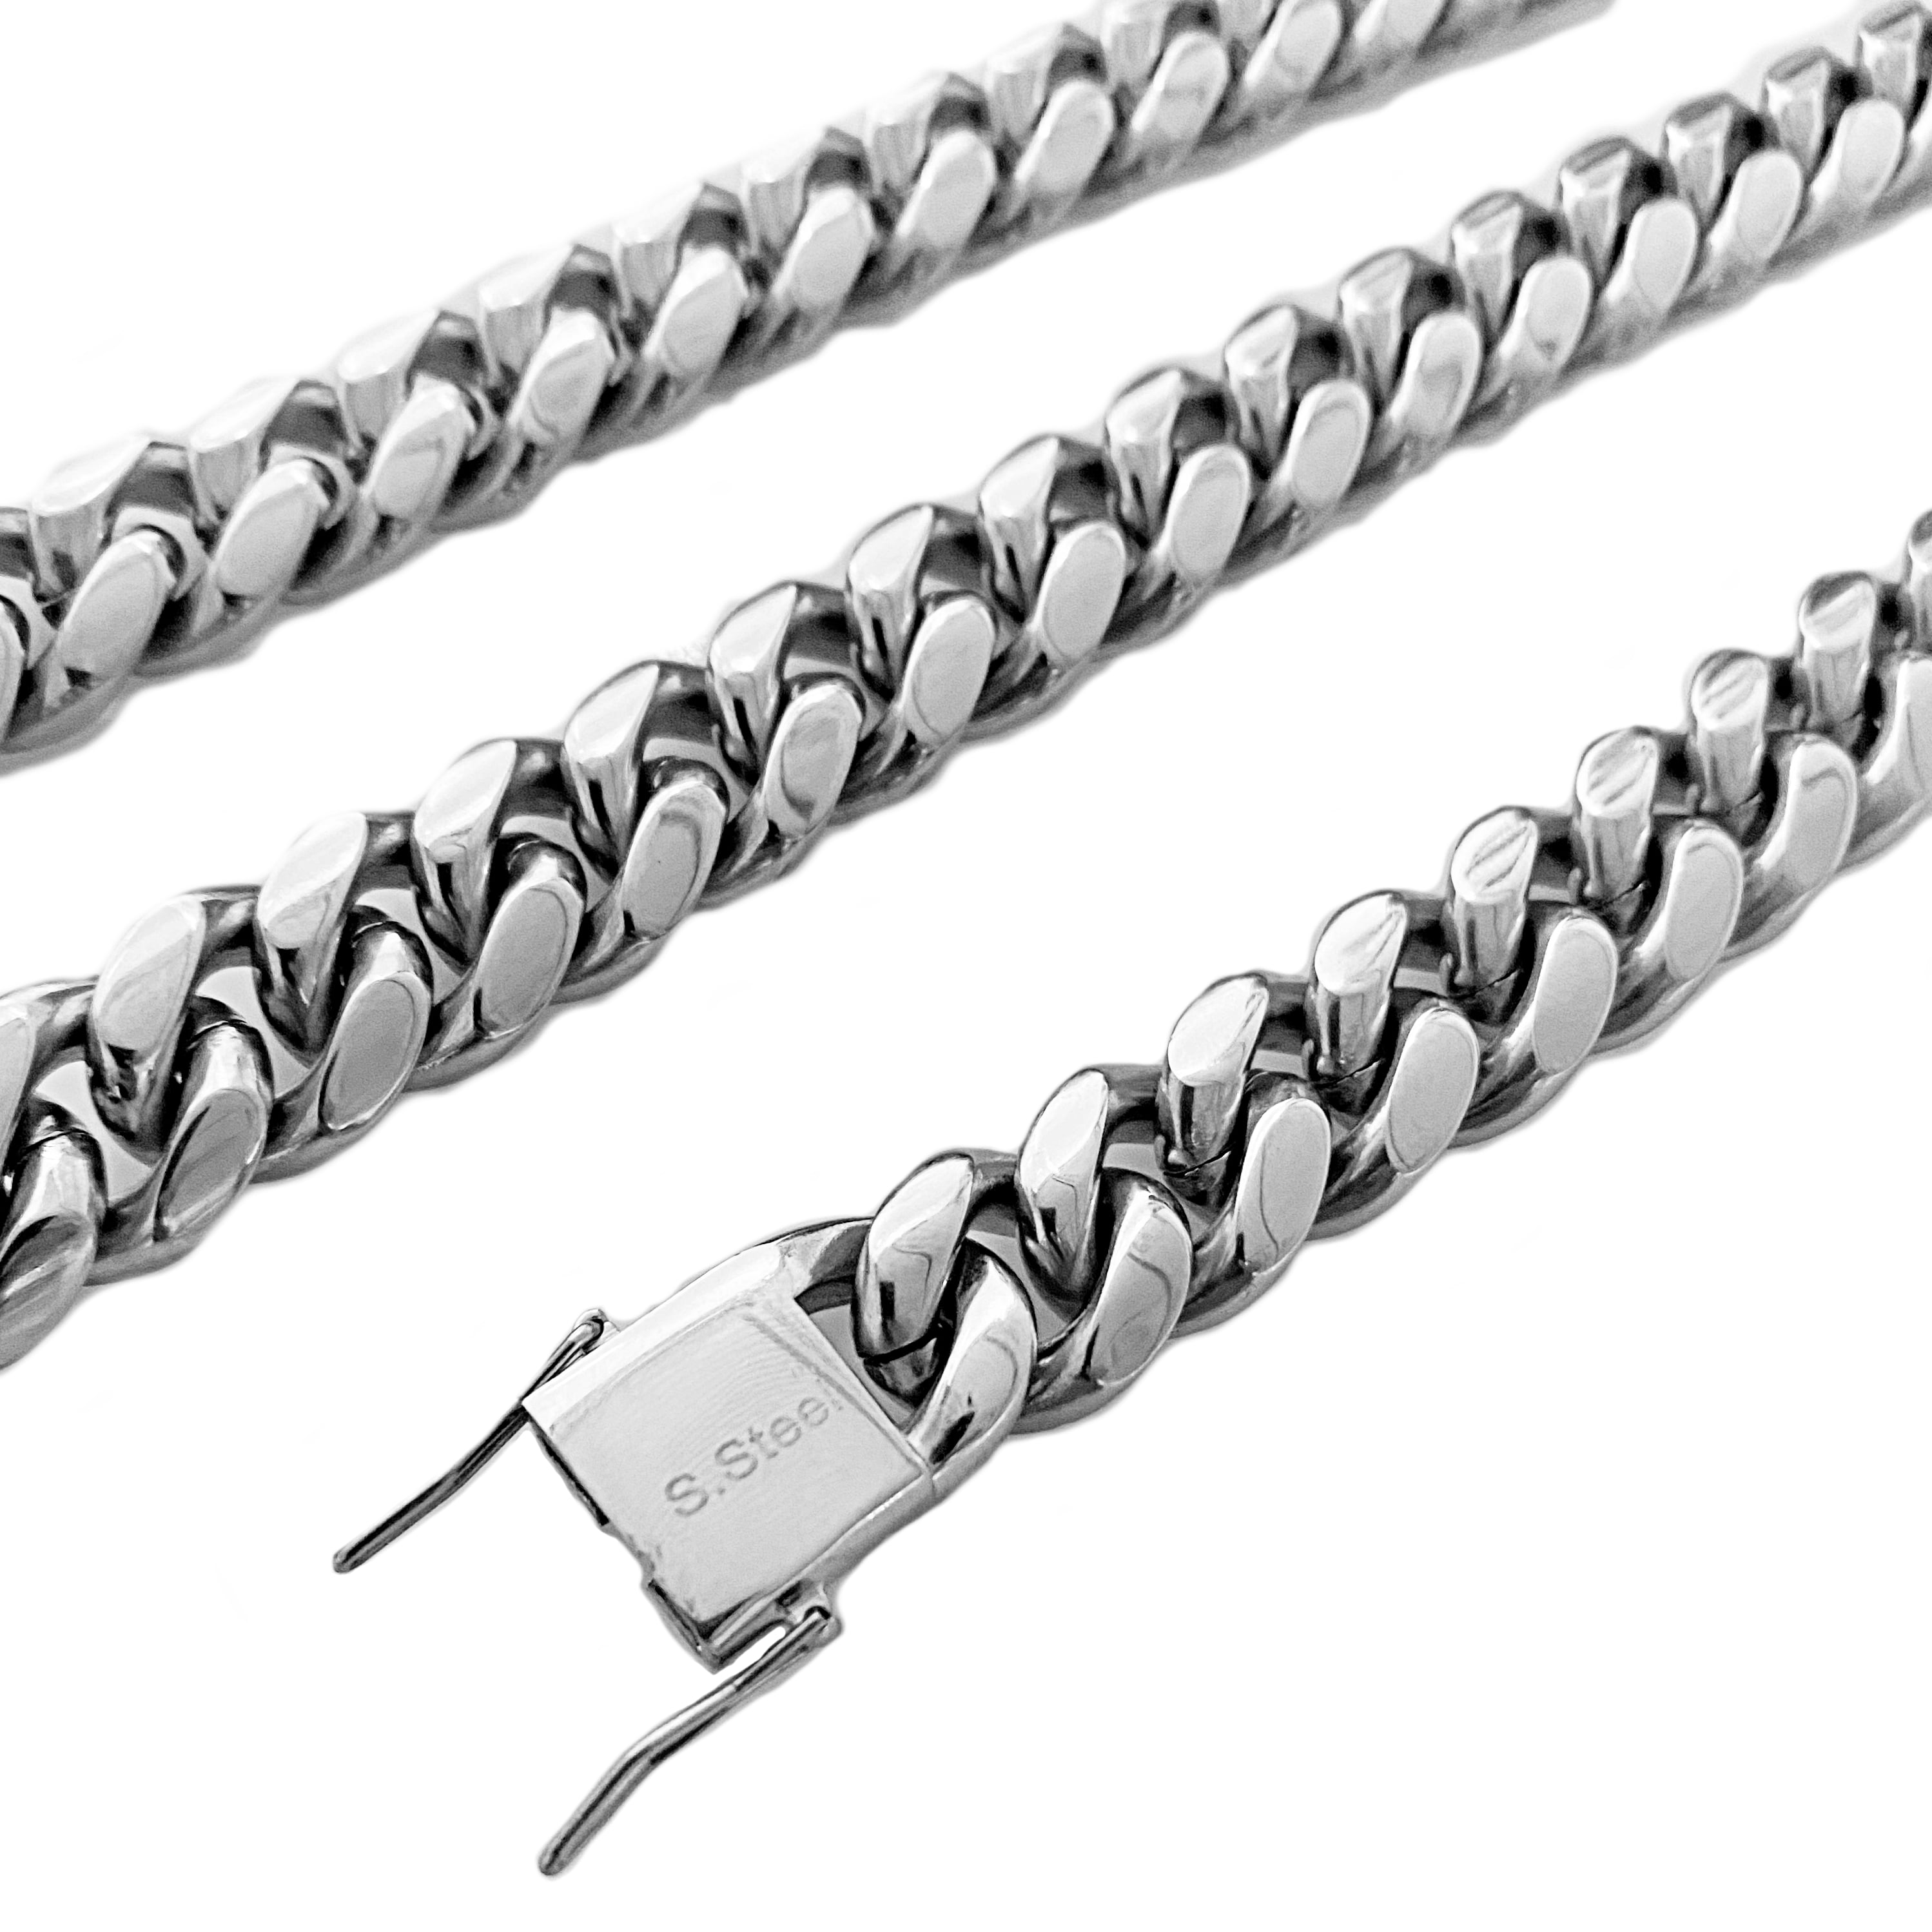 Chains Hip Hop 12MM 14MM Iced Out Rhinestone Clasp Miami Necklace Mens 316L  Stainless Steel Cuban Link Chain Necklaces For Men Jew3019